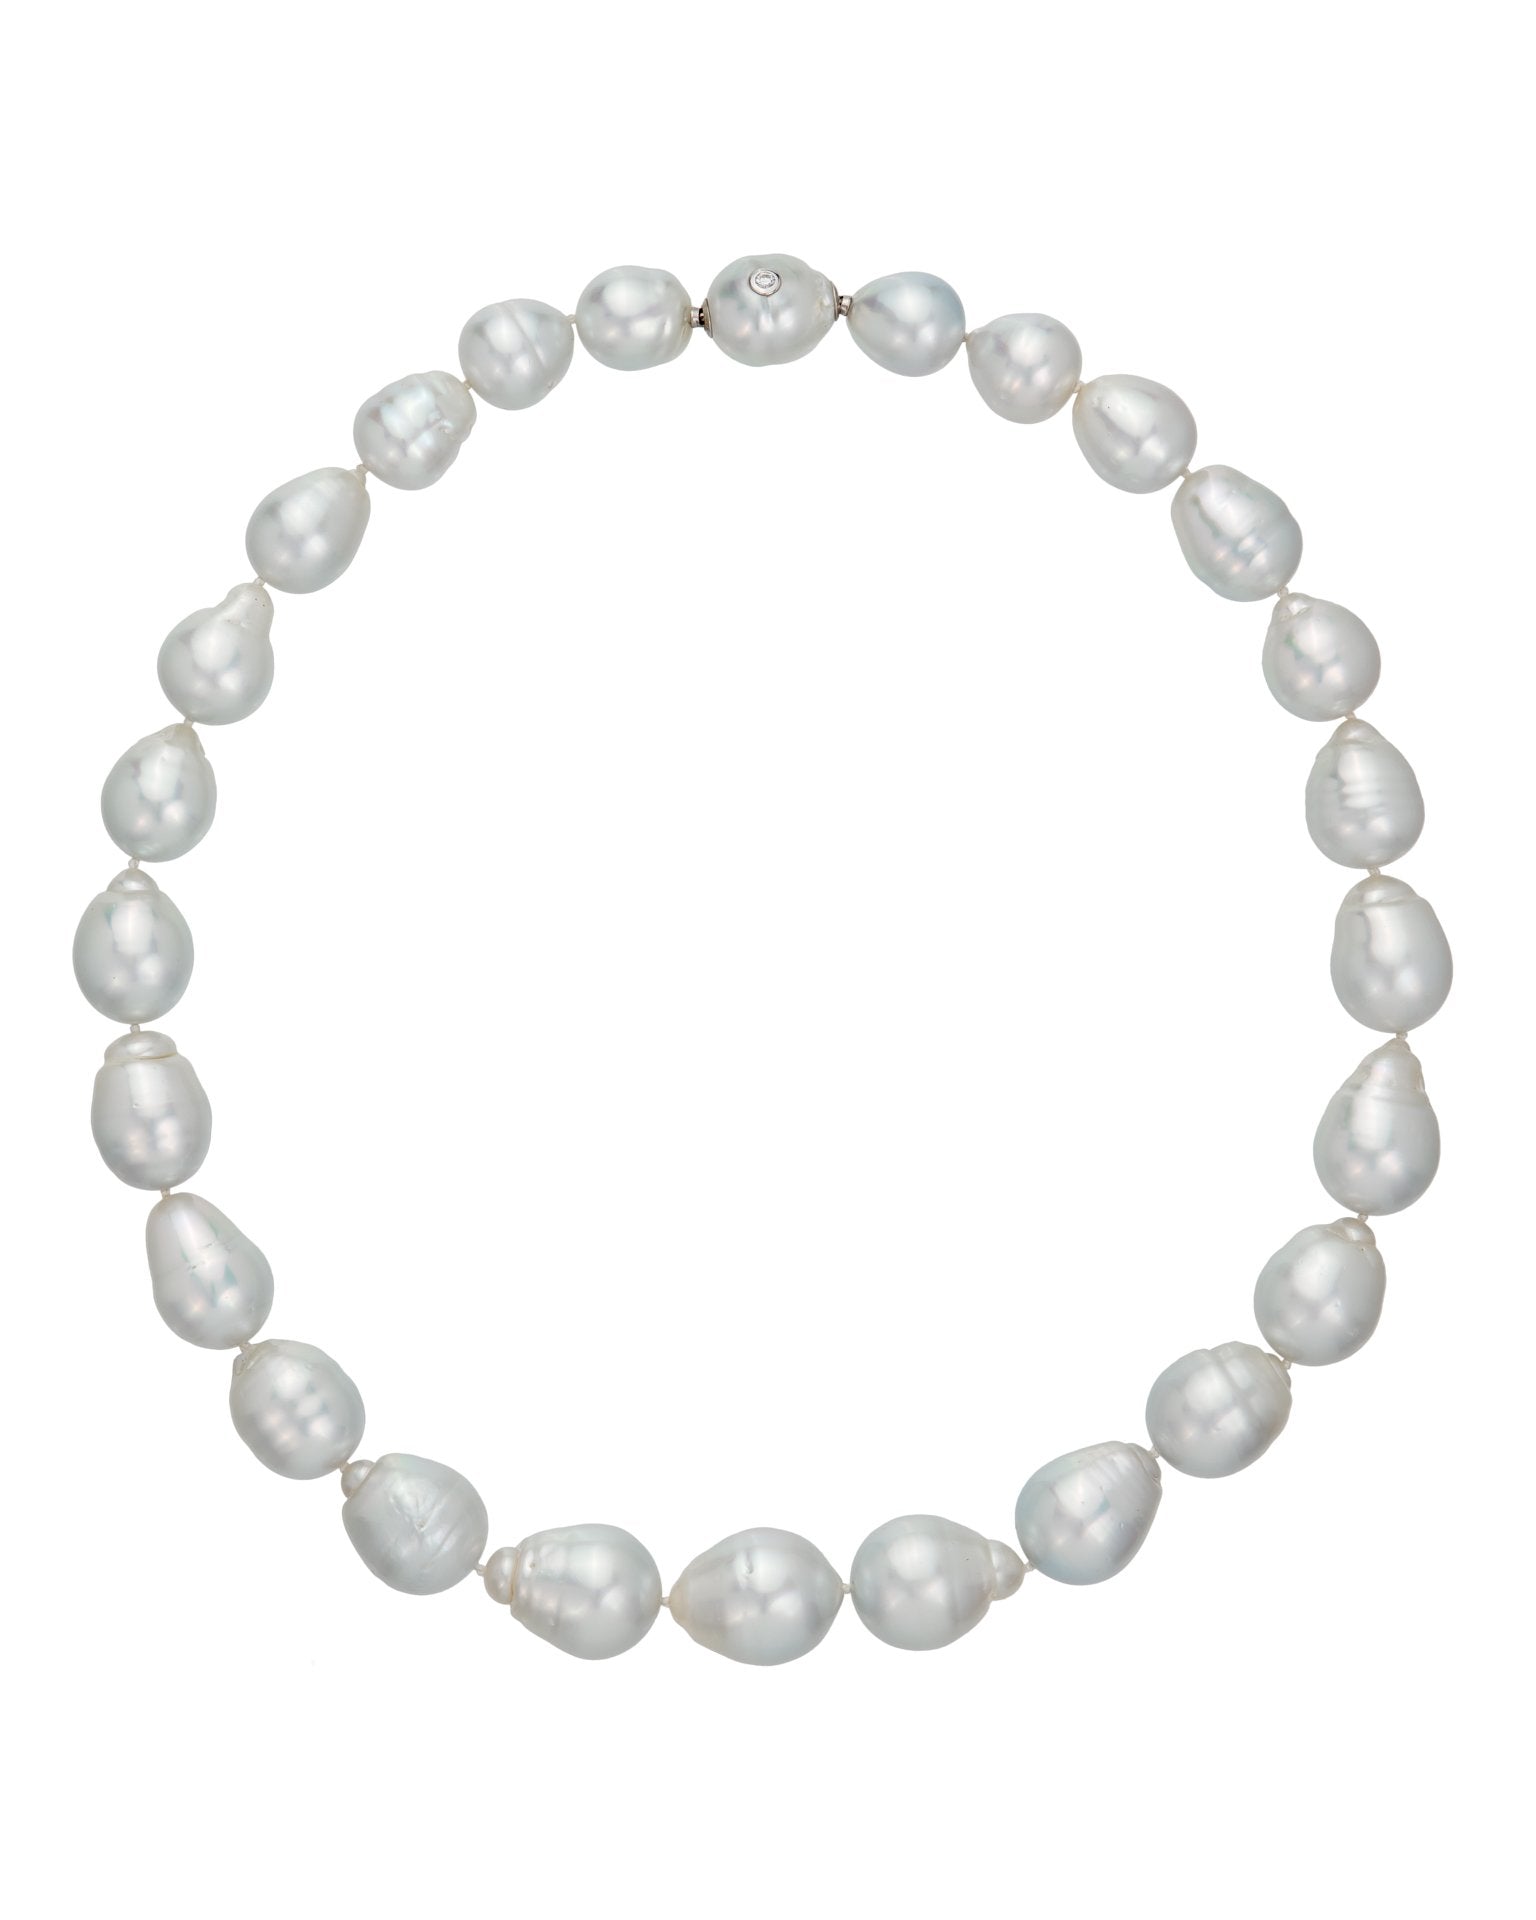 South Sea pearl strand, crafted in 18 karat white gold.